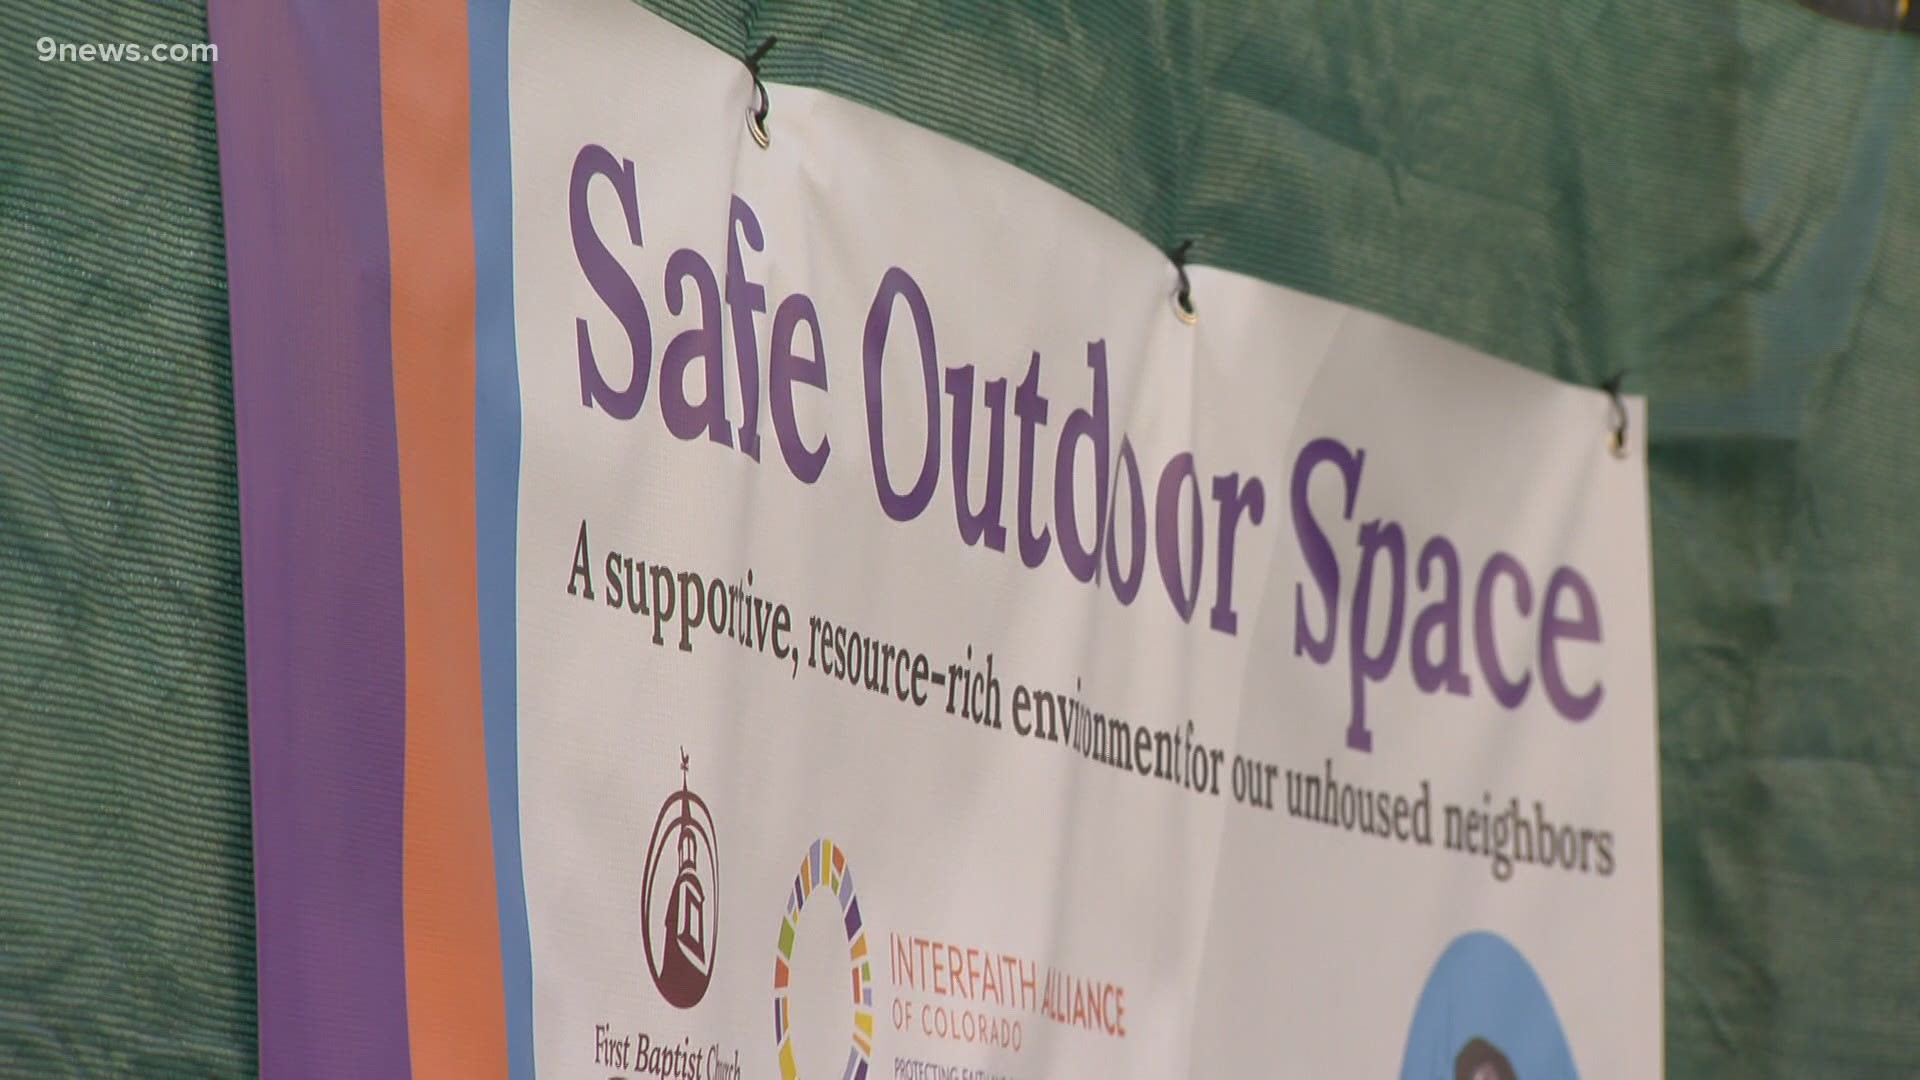 People experiencing homelessness will be moved from the Safe Outdoor Spaces located in Capitol Hill to the new space at Regis Tuesday morning.